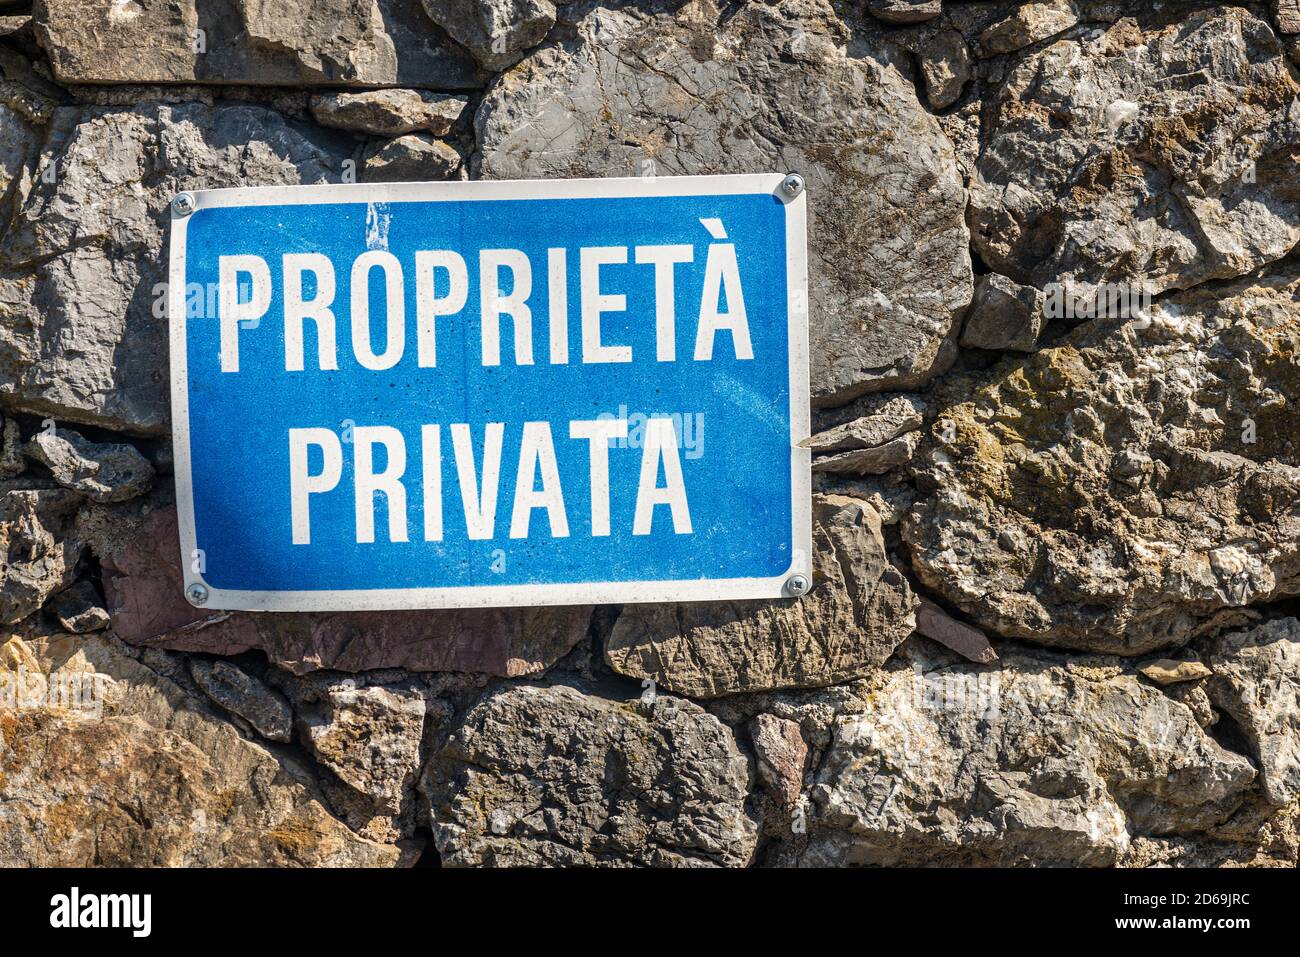 Proprieta Privata, Blue and white Private Property sign in Italian language hanging on a stone wall. Liguria, Italy, Europe Stock Photo